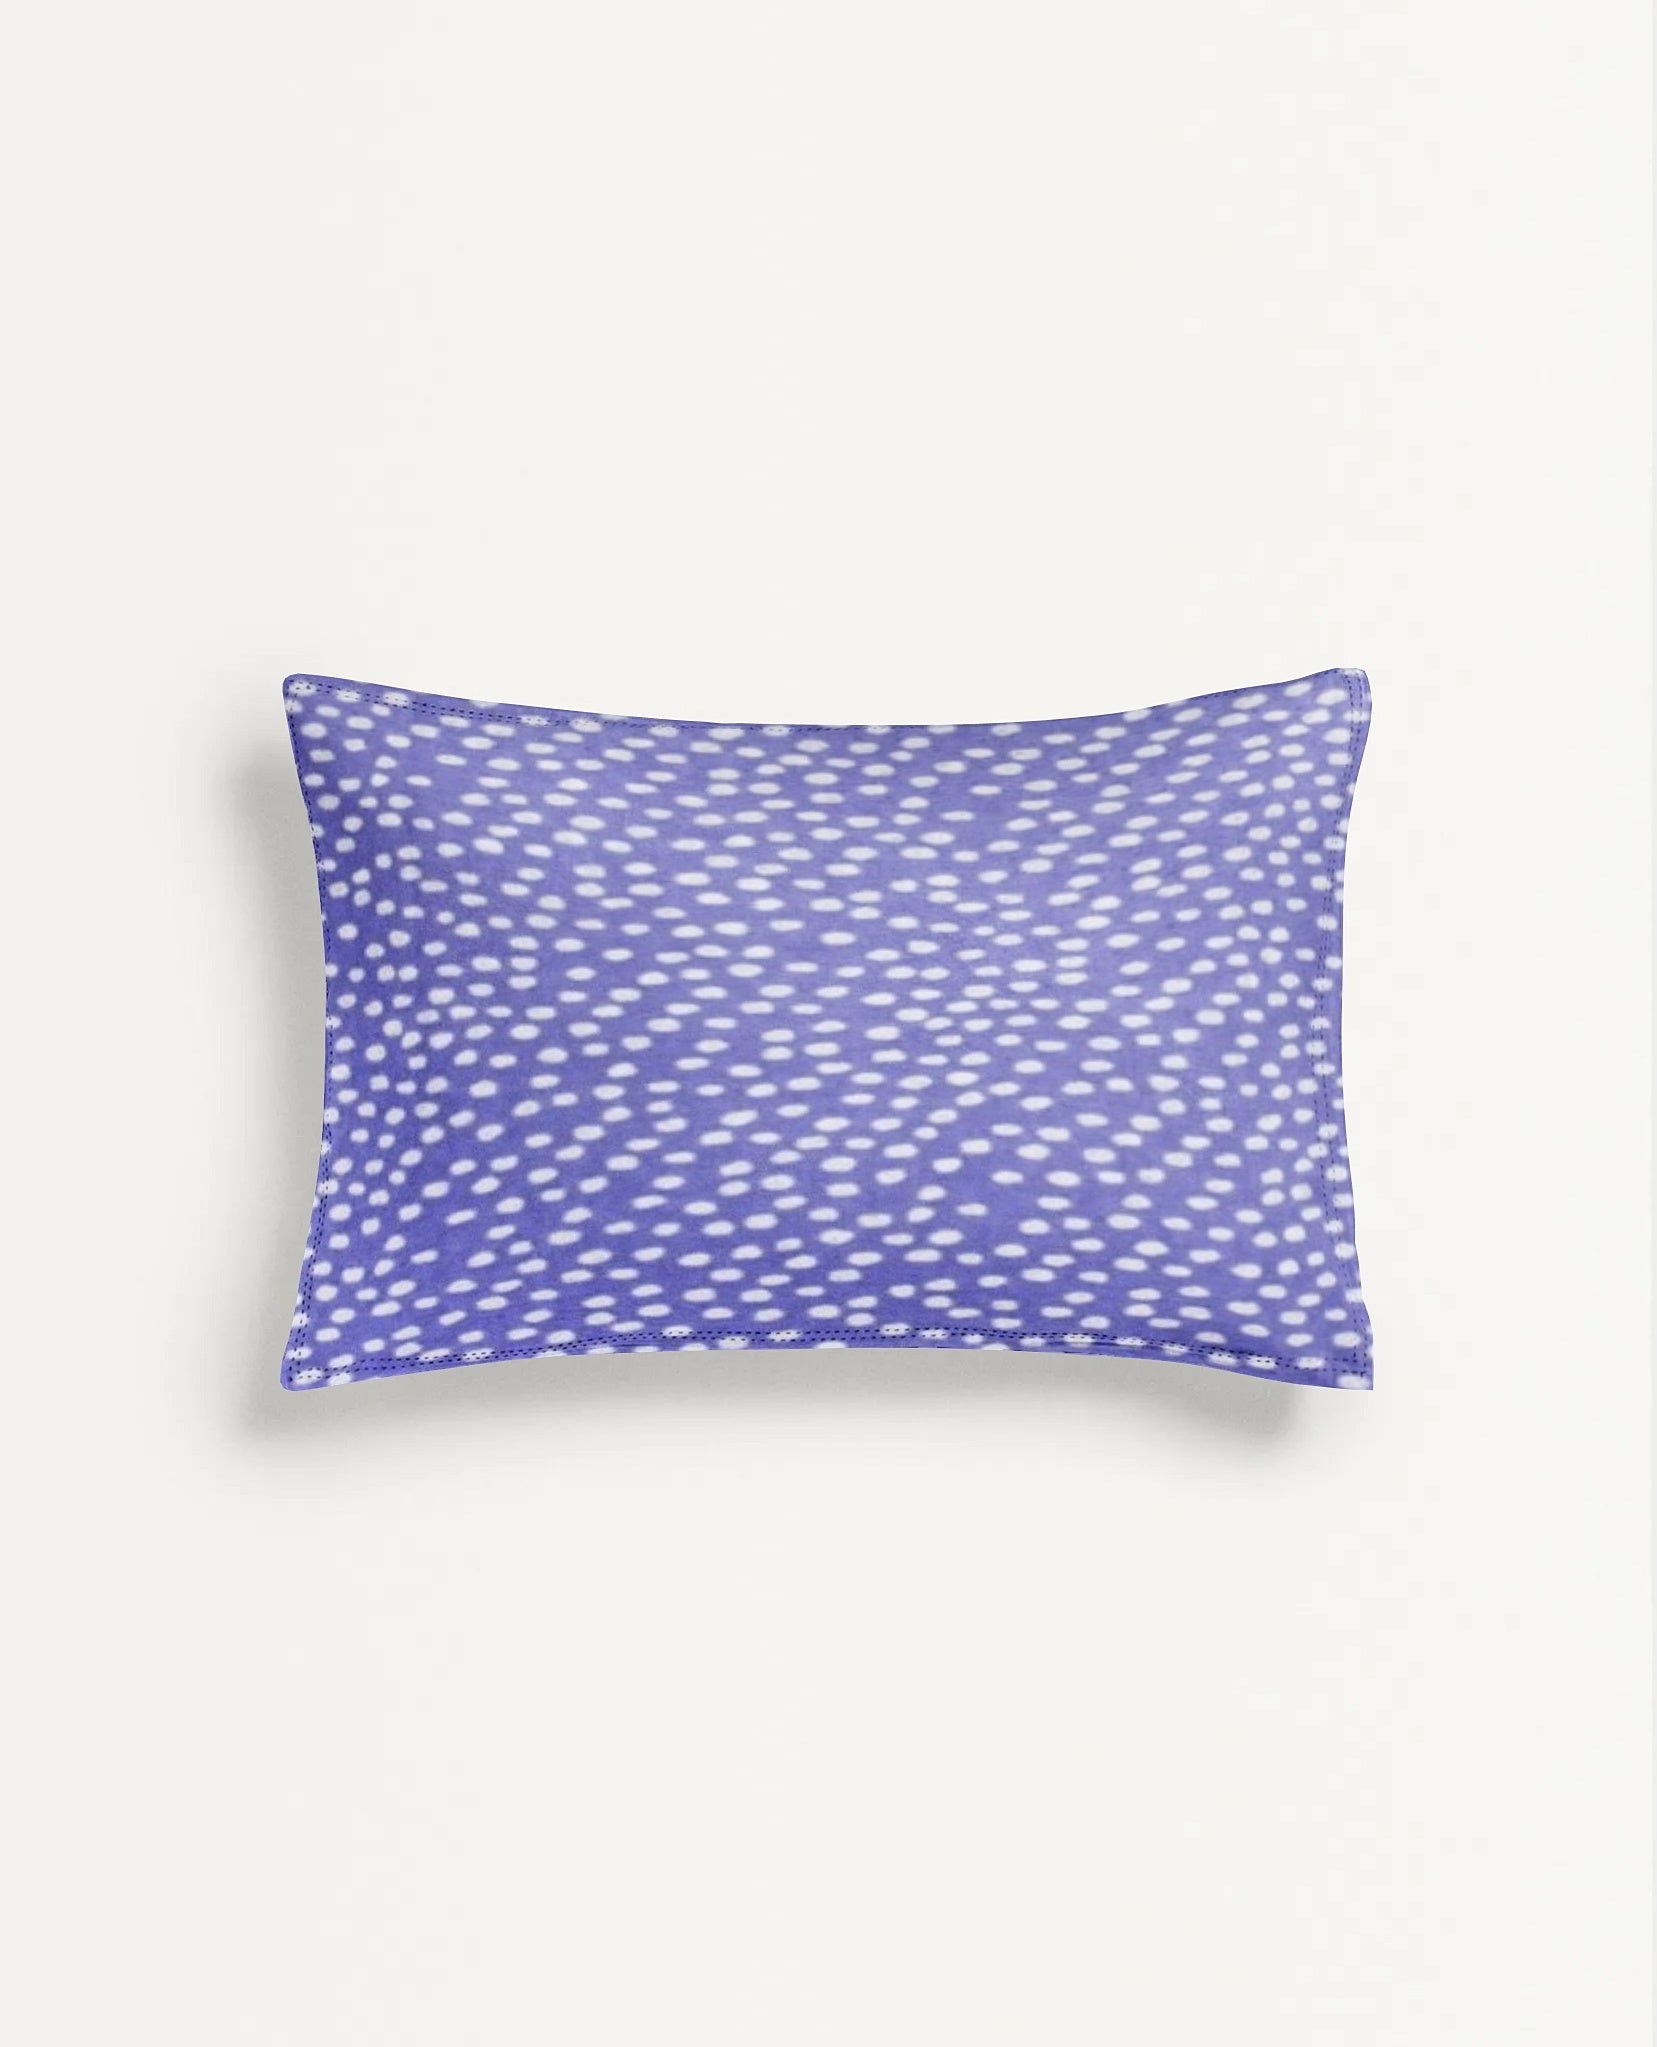 ‘Purple and White Spots’ Organic Junior Pillow Cover